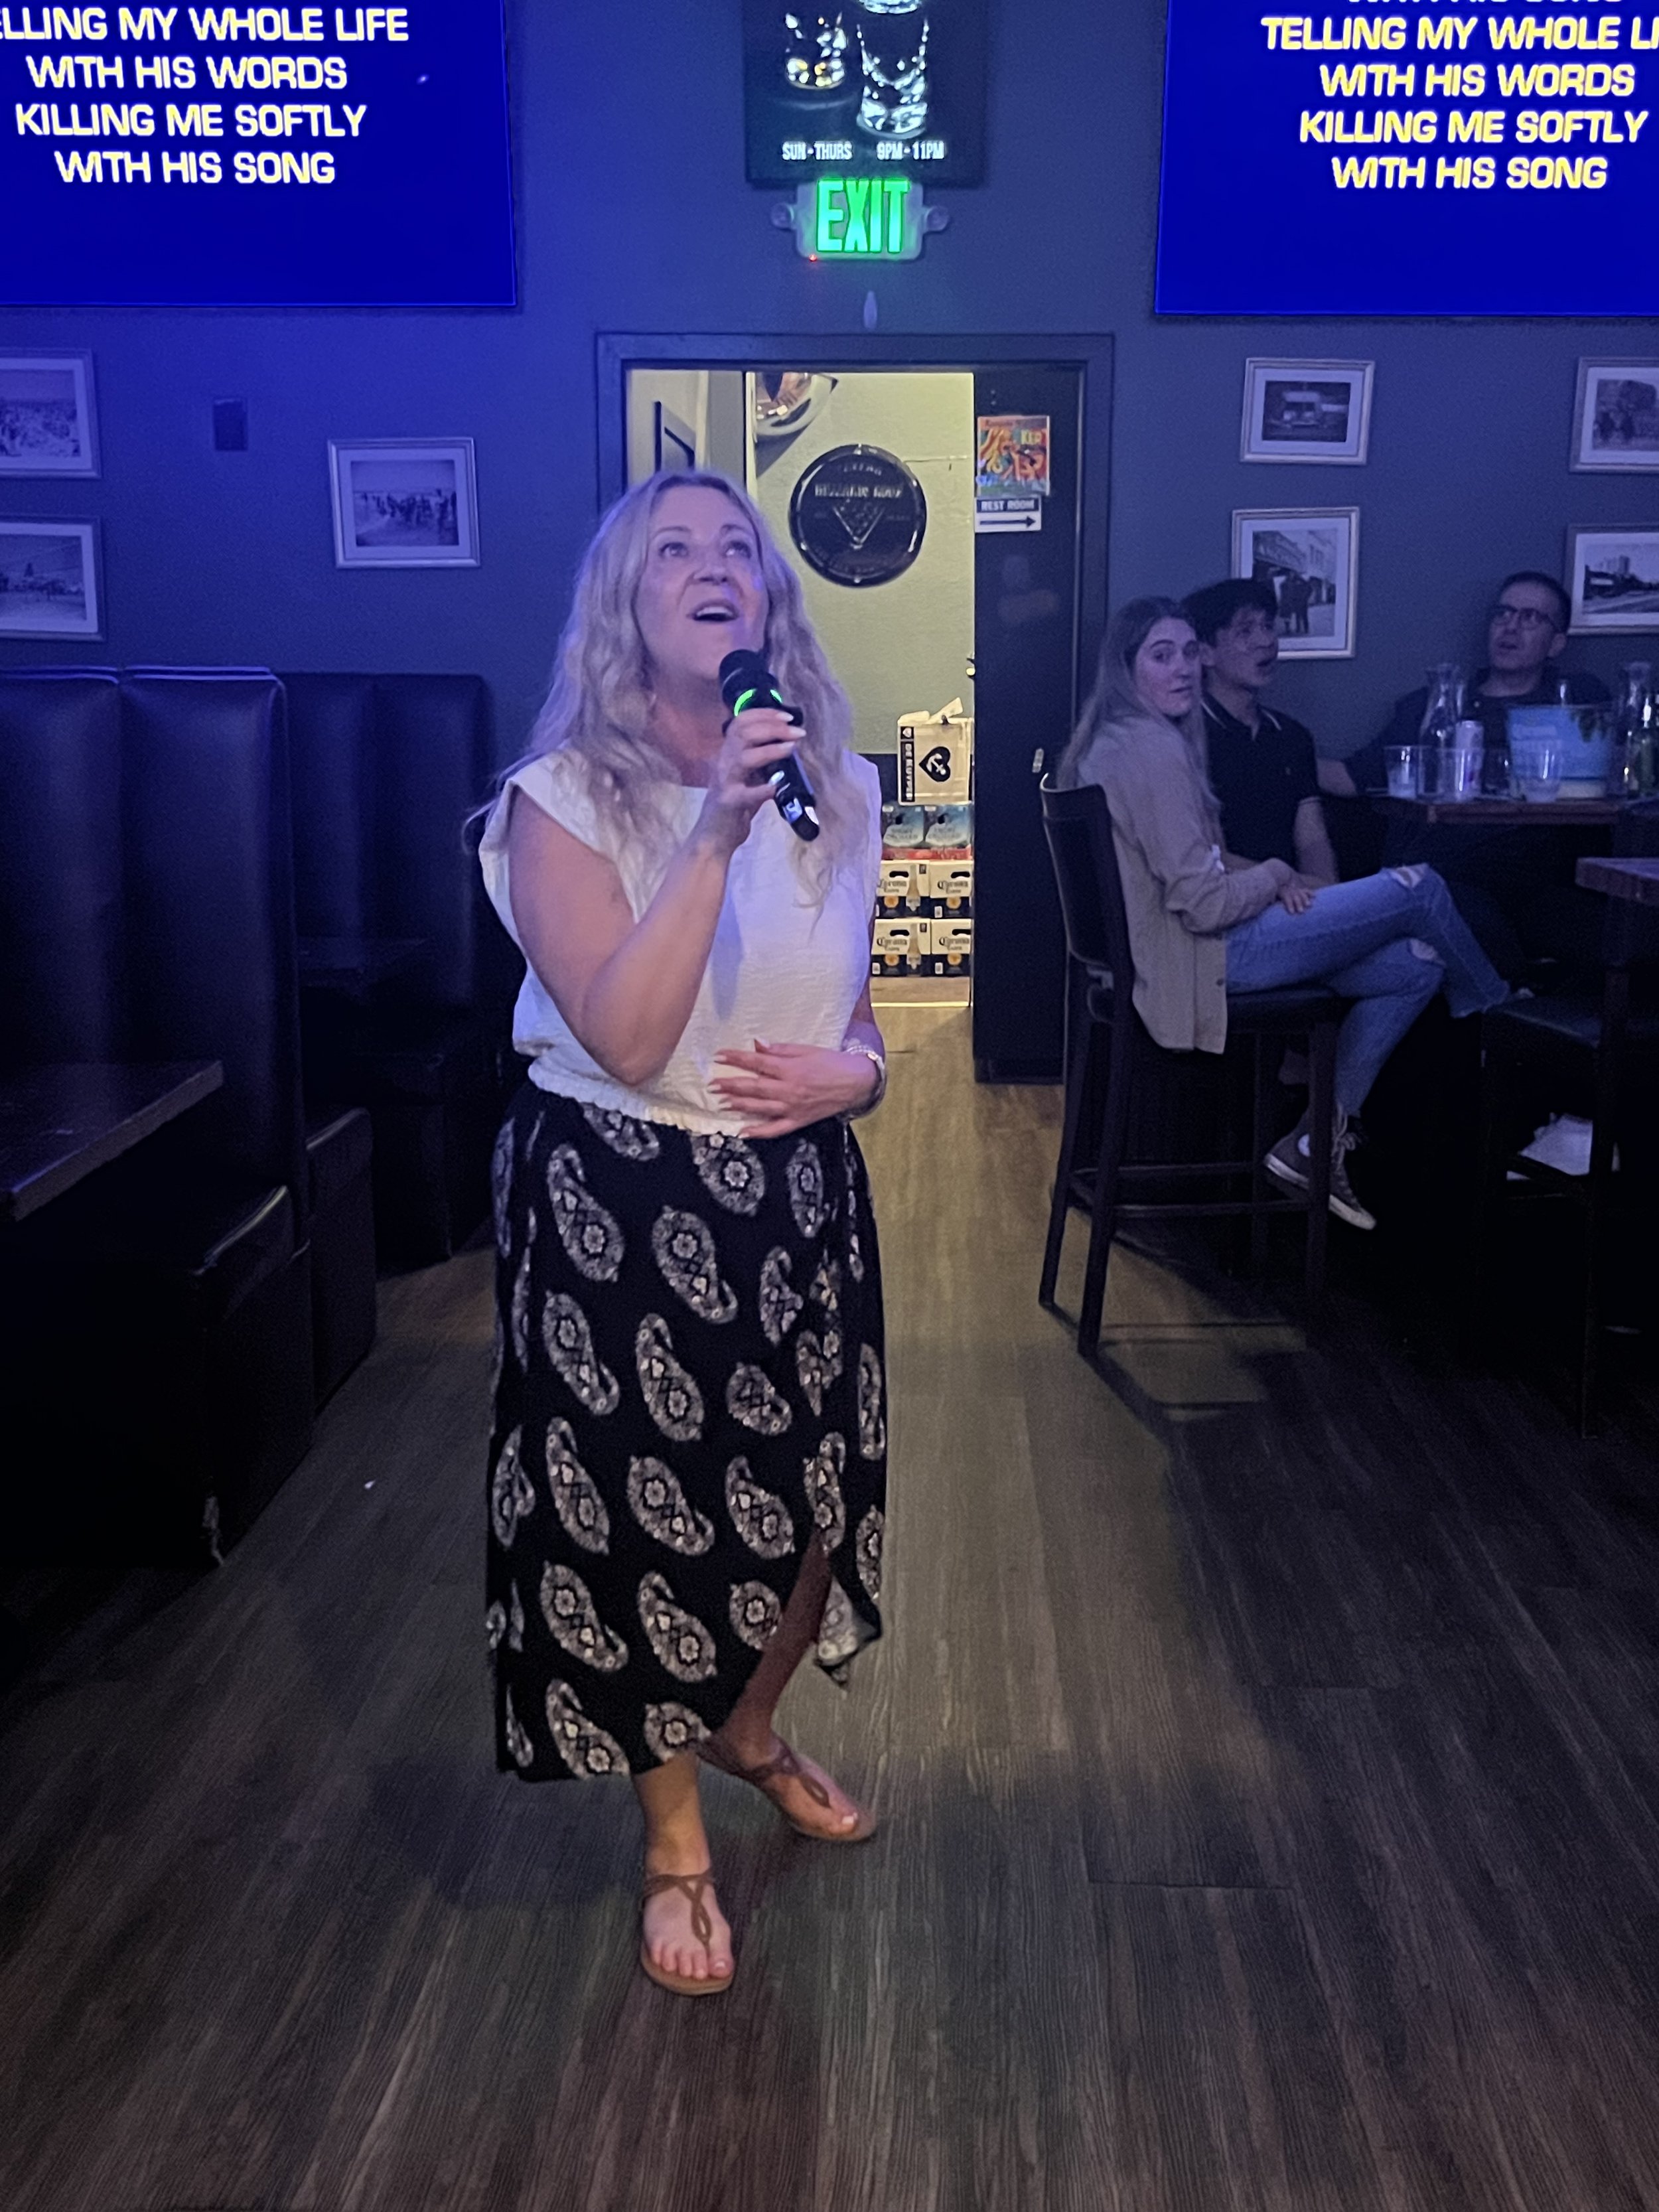  Tina Whales sings "Killing Me Softly With His Song" by Fugees during Karaoke Night Party at Tavern on Main in Santa Monica, Calif., on Wednesday, Sept. 13, 2023. Tavern on Main hosts this event twice a week every Monday and Wednesday. (Maria Lebedev